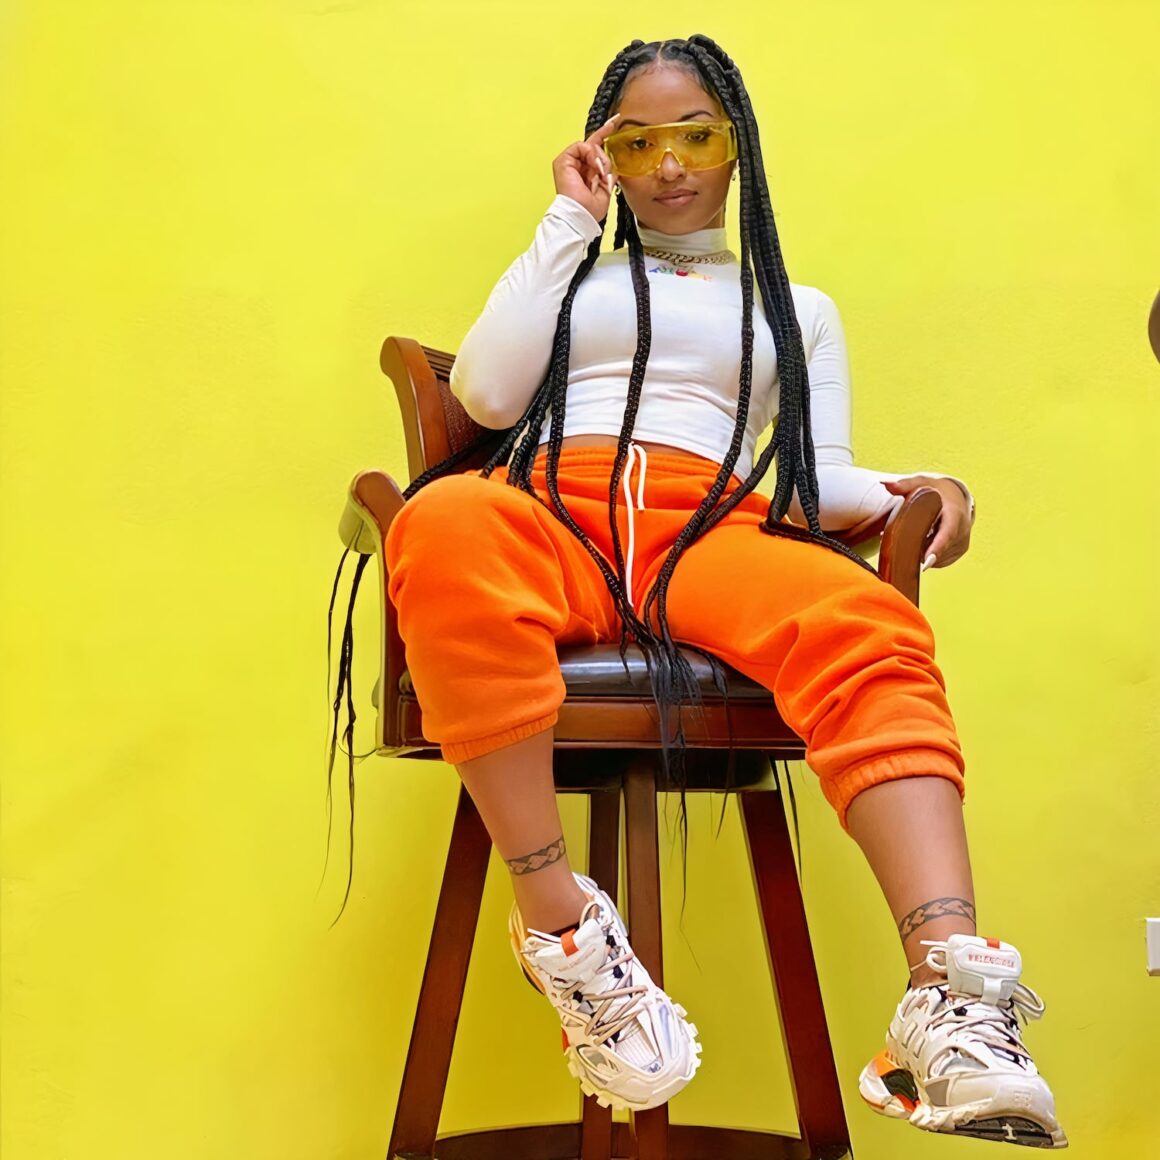 Shenseea Faces $10 Million Copyright Lawsuit Over ‘Lick' Song With Megan Thee Stallion